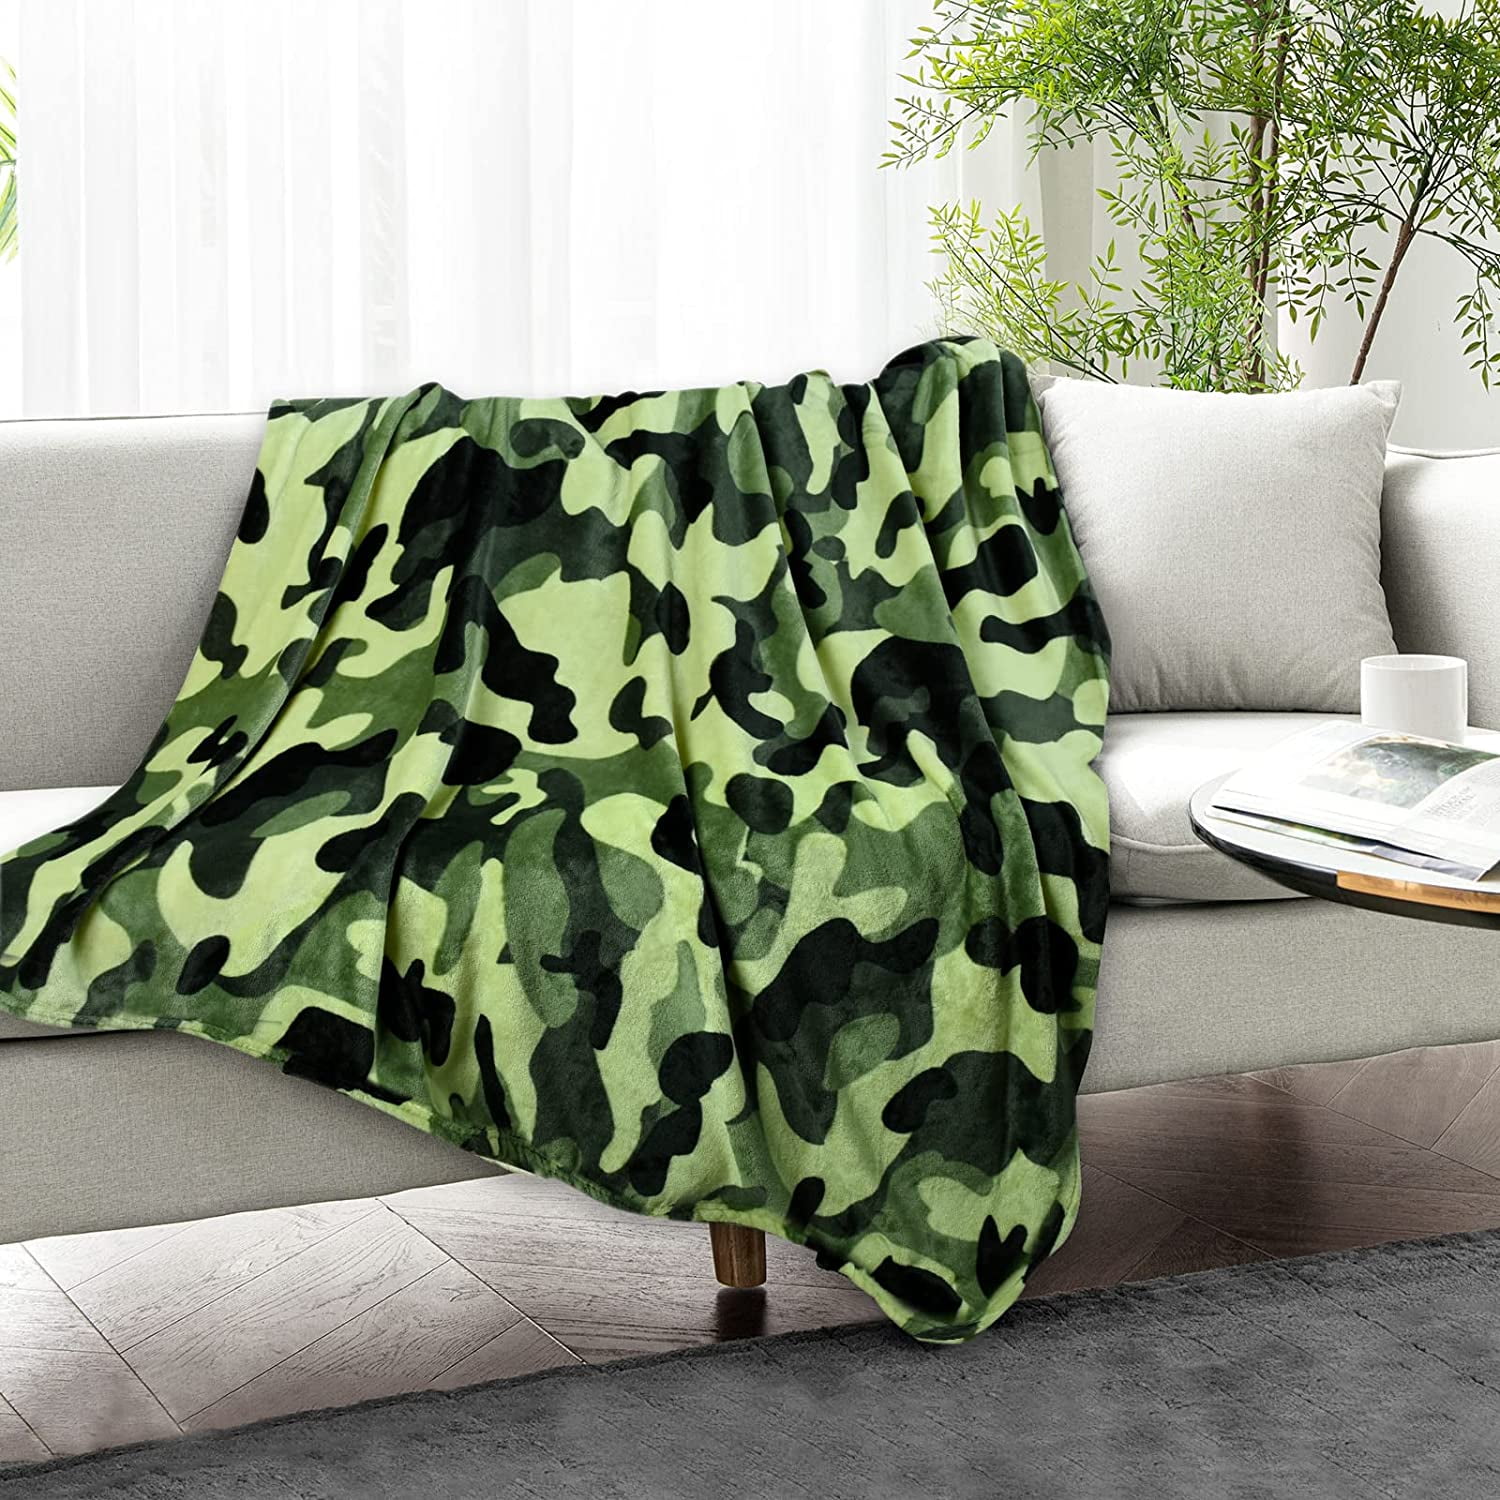 Camouflage Blanket 50x60 Inch Soft Camo Throw Blanket for Military Fans,  Kids, Boys, for Couch, Bed, Travel, Camping, Green Camo 